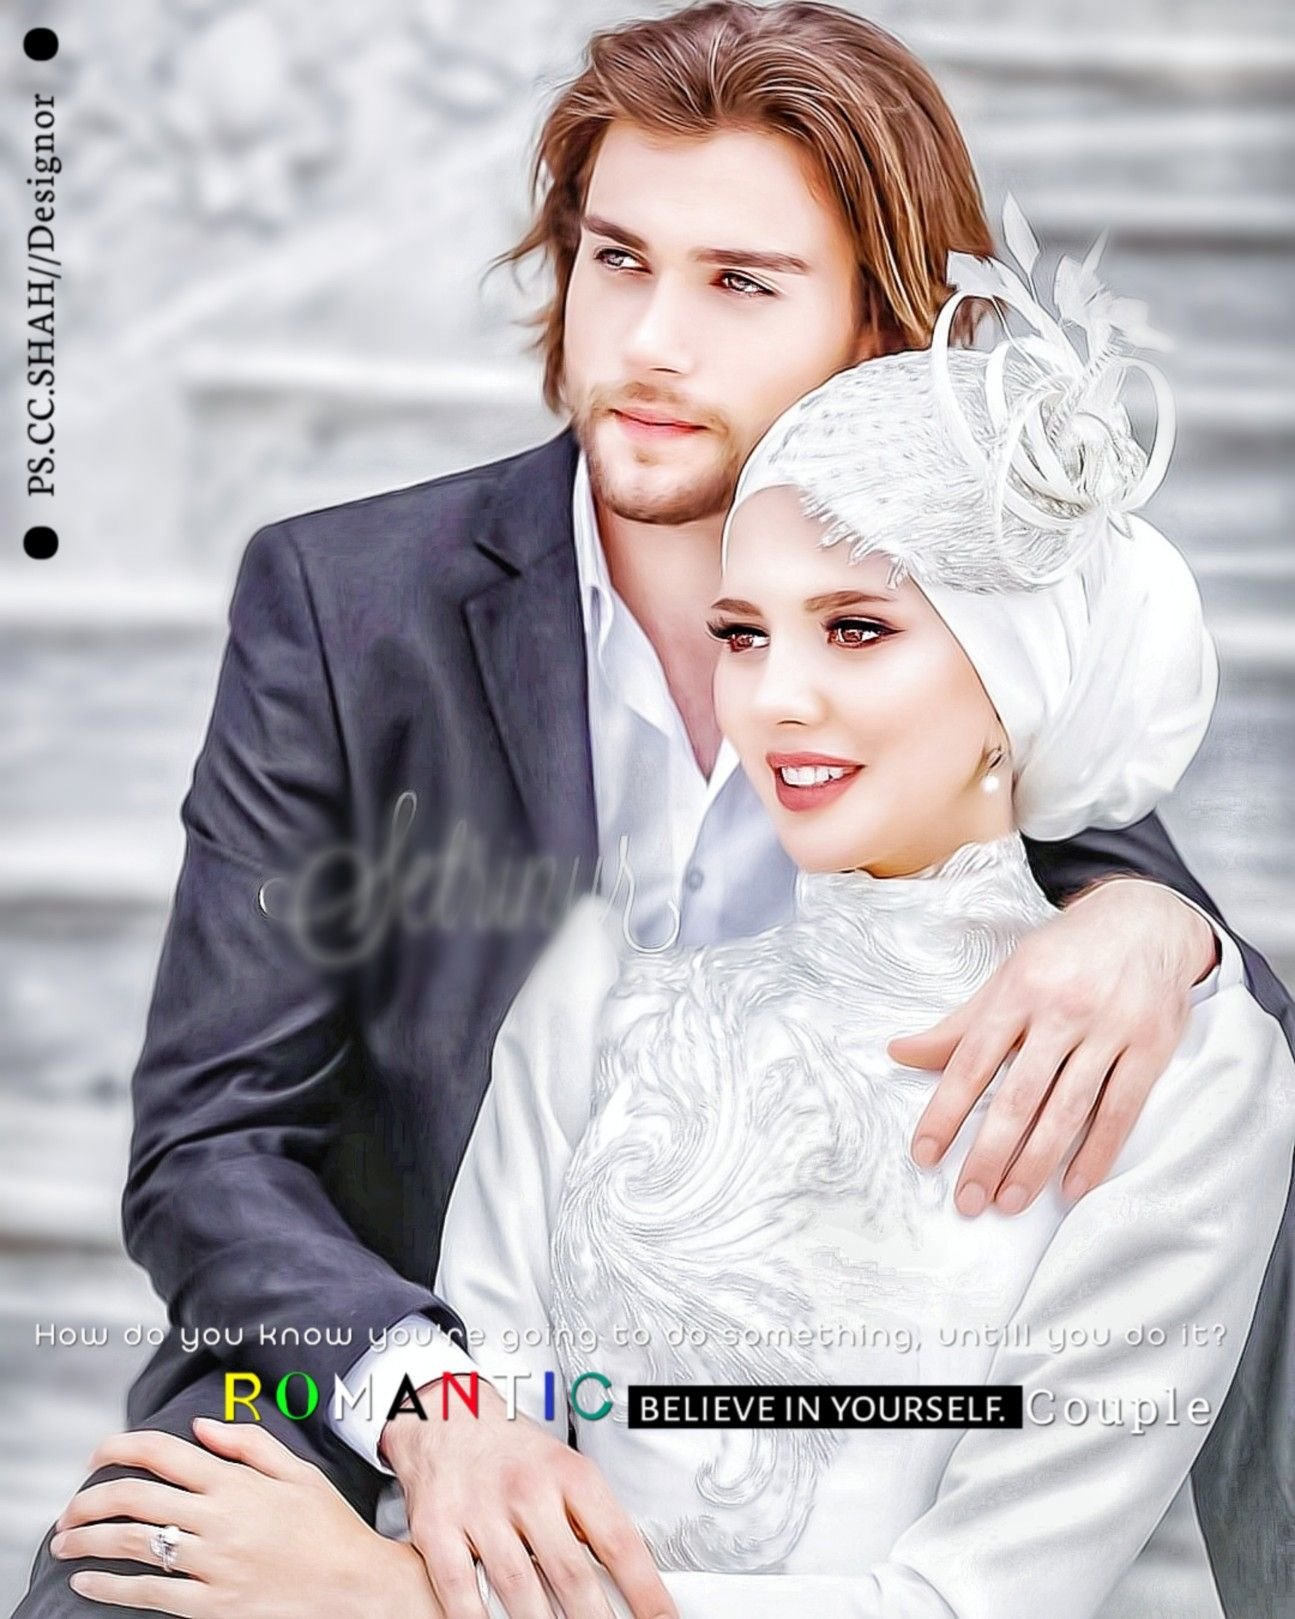 Muslim Couple Images For DP